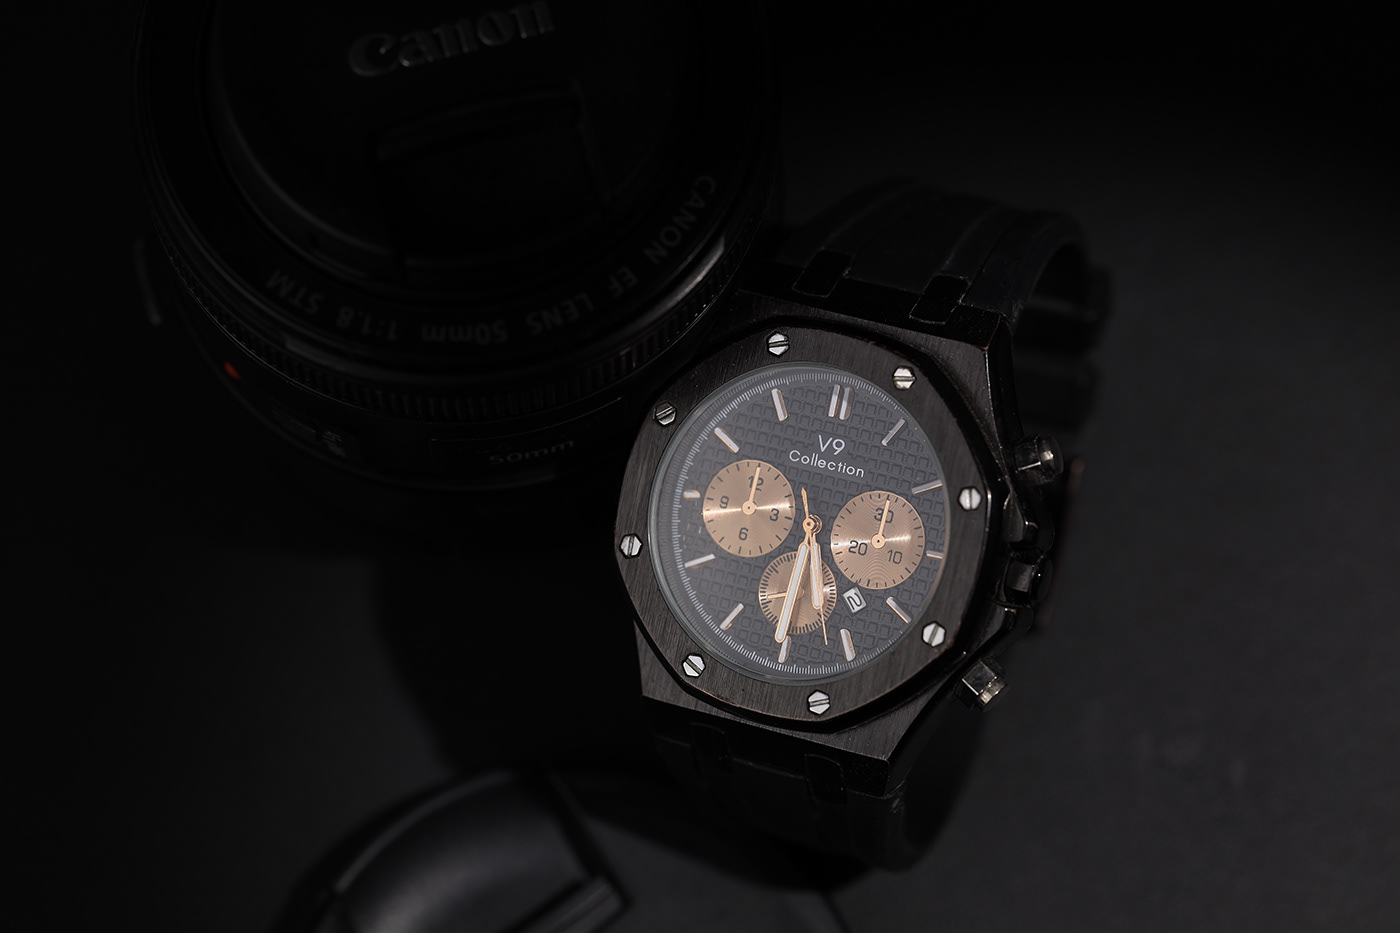 watch Photography  Commercial Photography productphotography Productshoot Productstyling styling  Style lifestyle watchphotography